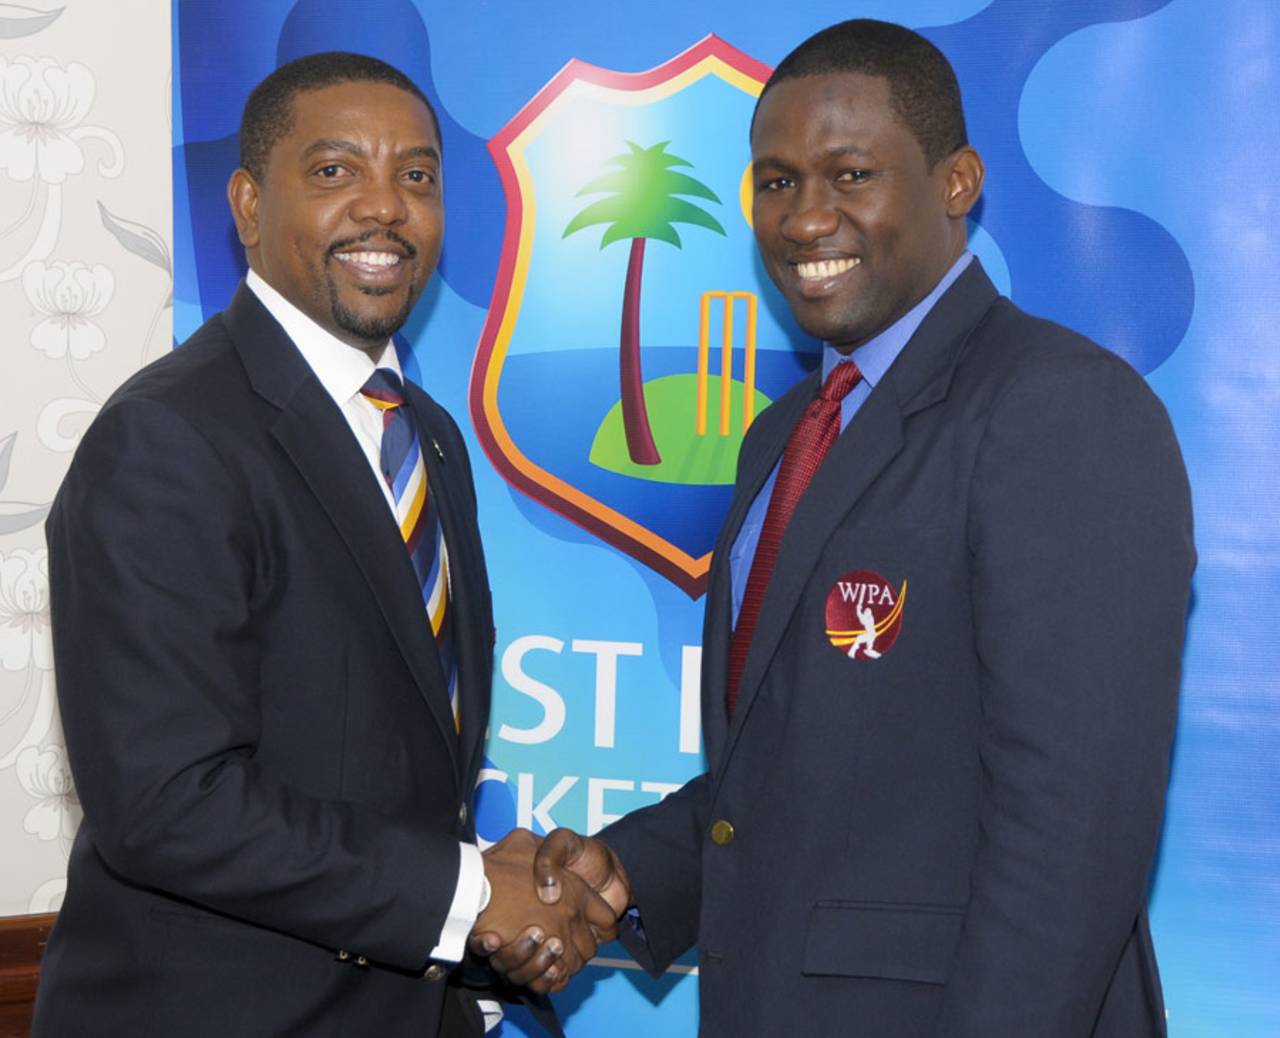 WICB president Dave Cameron (left) has said that the BCCI cannot press for legal proceedings as Indian courts lacked jurisdiction in the matter&nbsp;&nbsp;&bull;&nbsp;&nbsp;WICB Media Photo/Randy Brooks